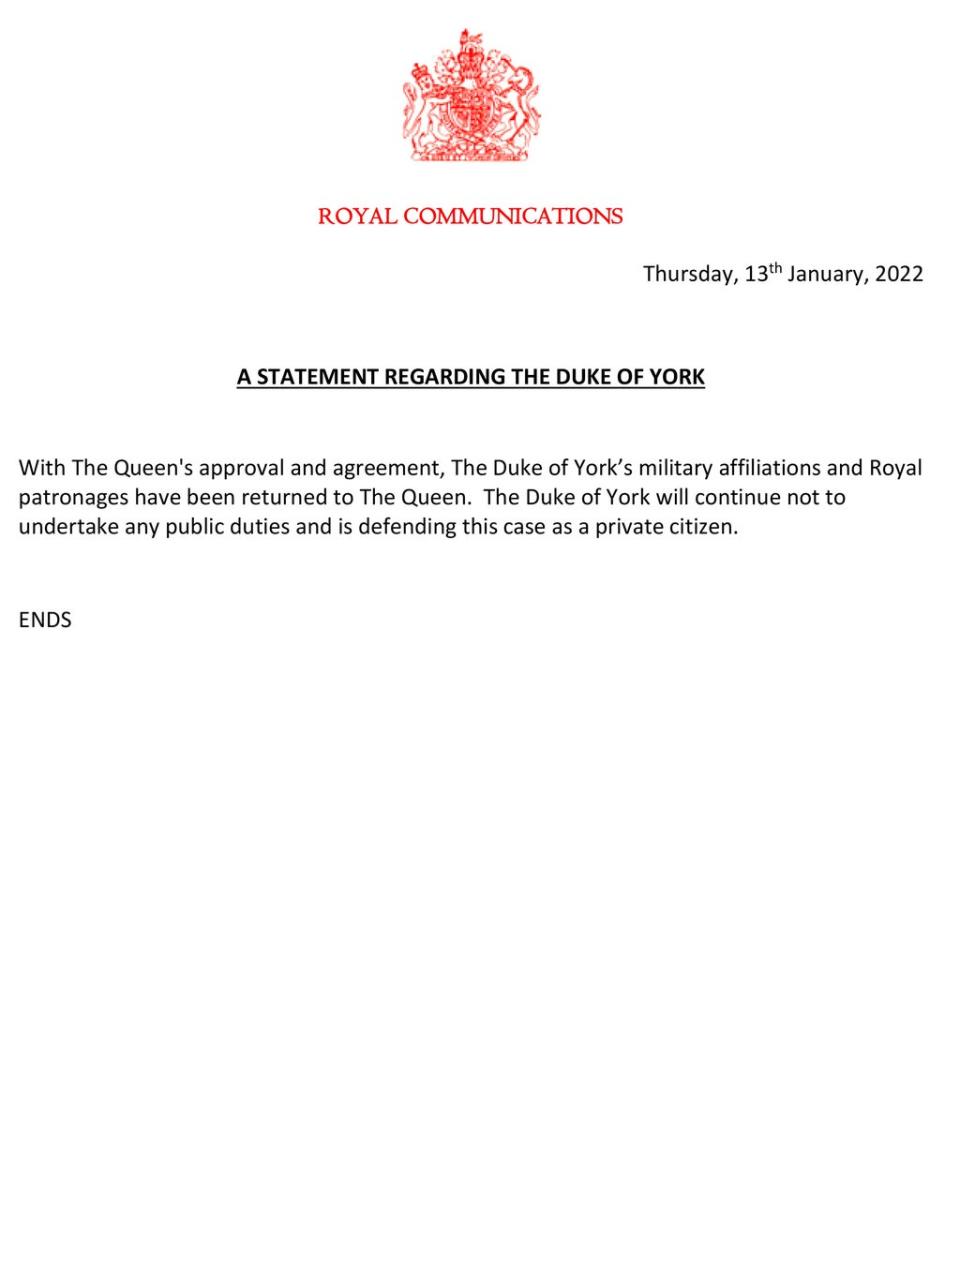 The Duke of York’s military affiliations and royal patronages have been returned to the Queen (Handout/PA) (PA Media)